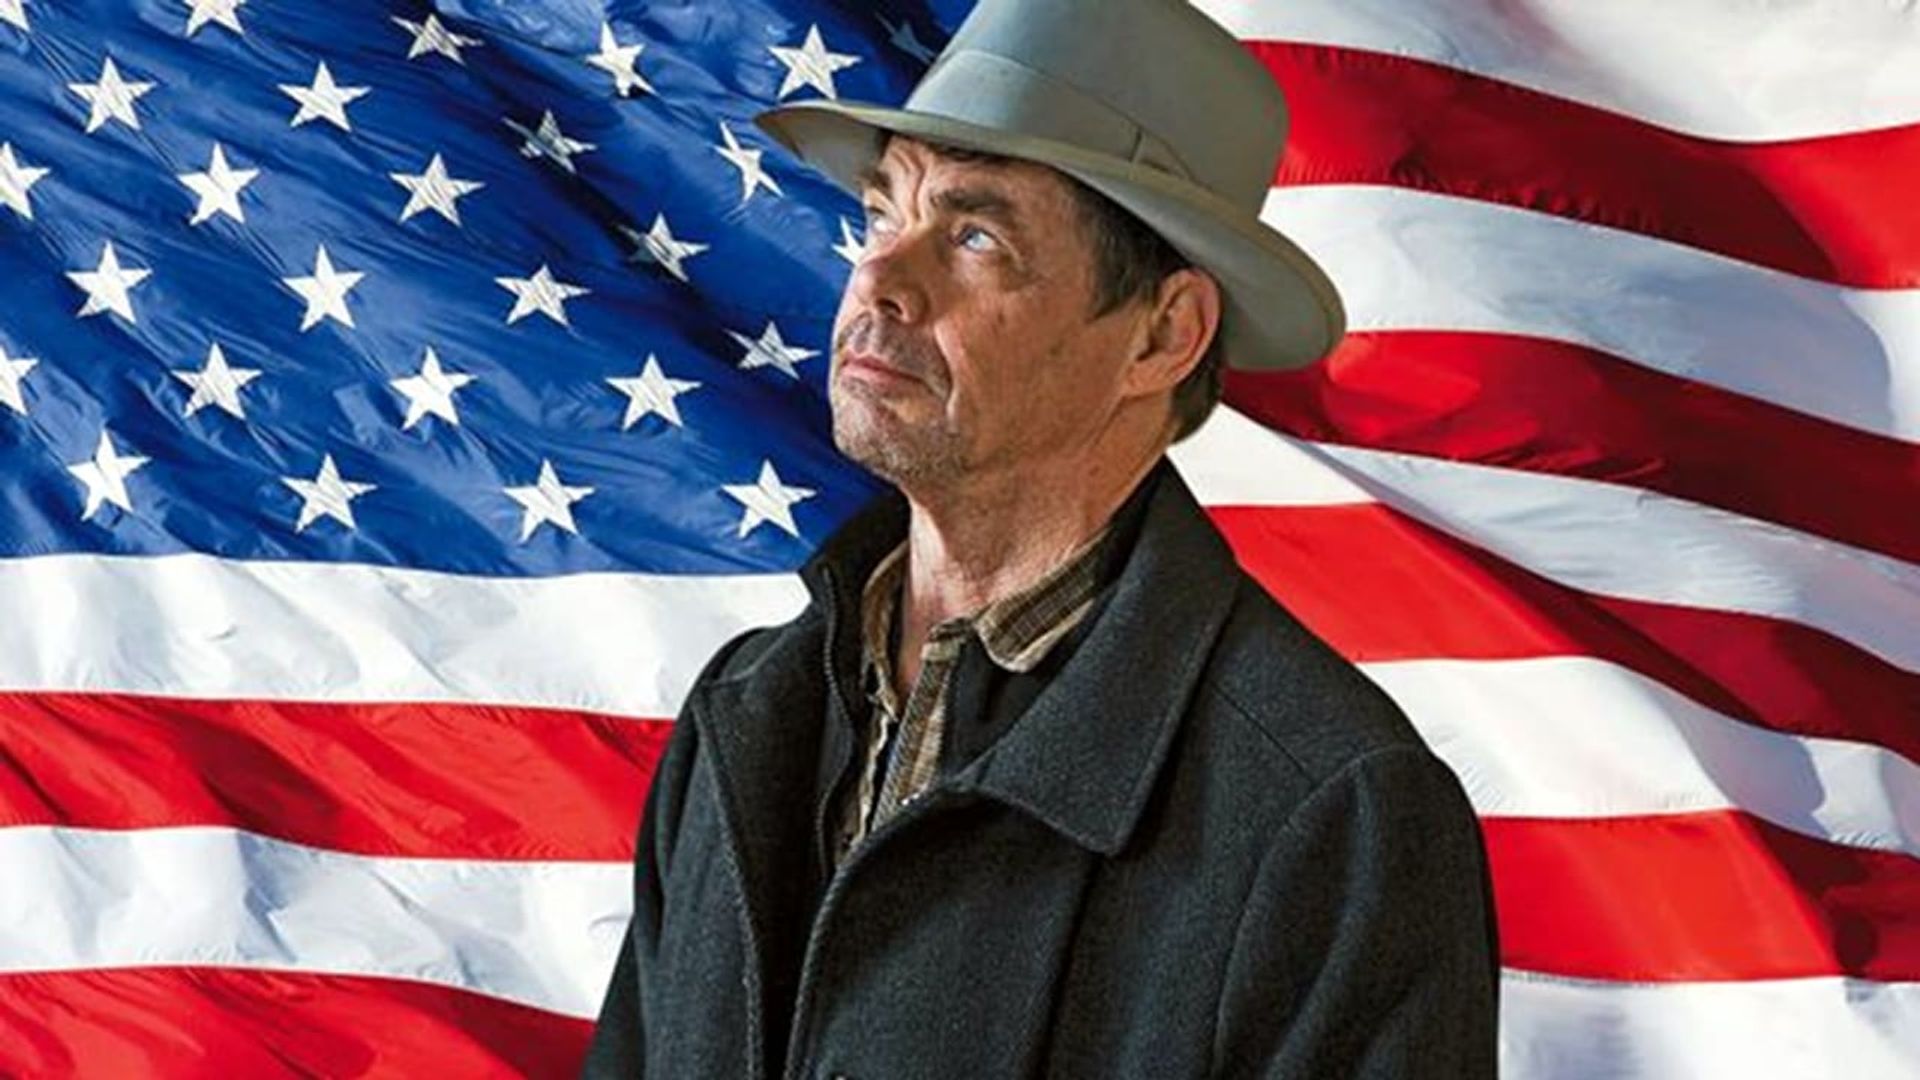 Rich Hall's Working for the American Dream background